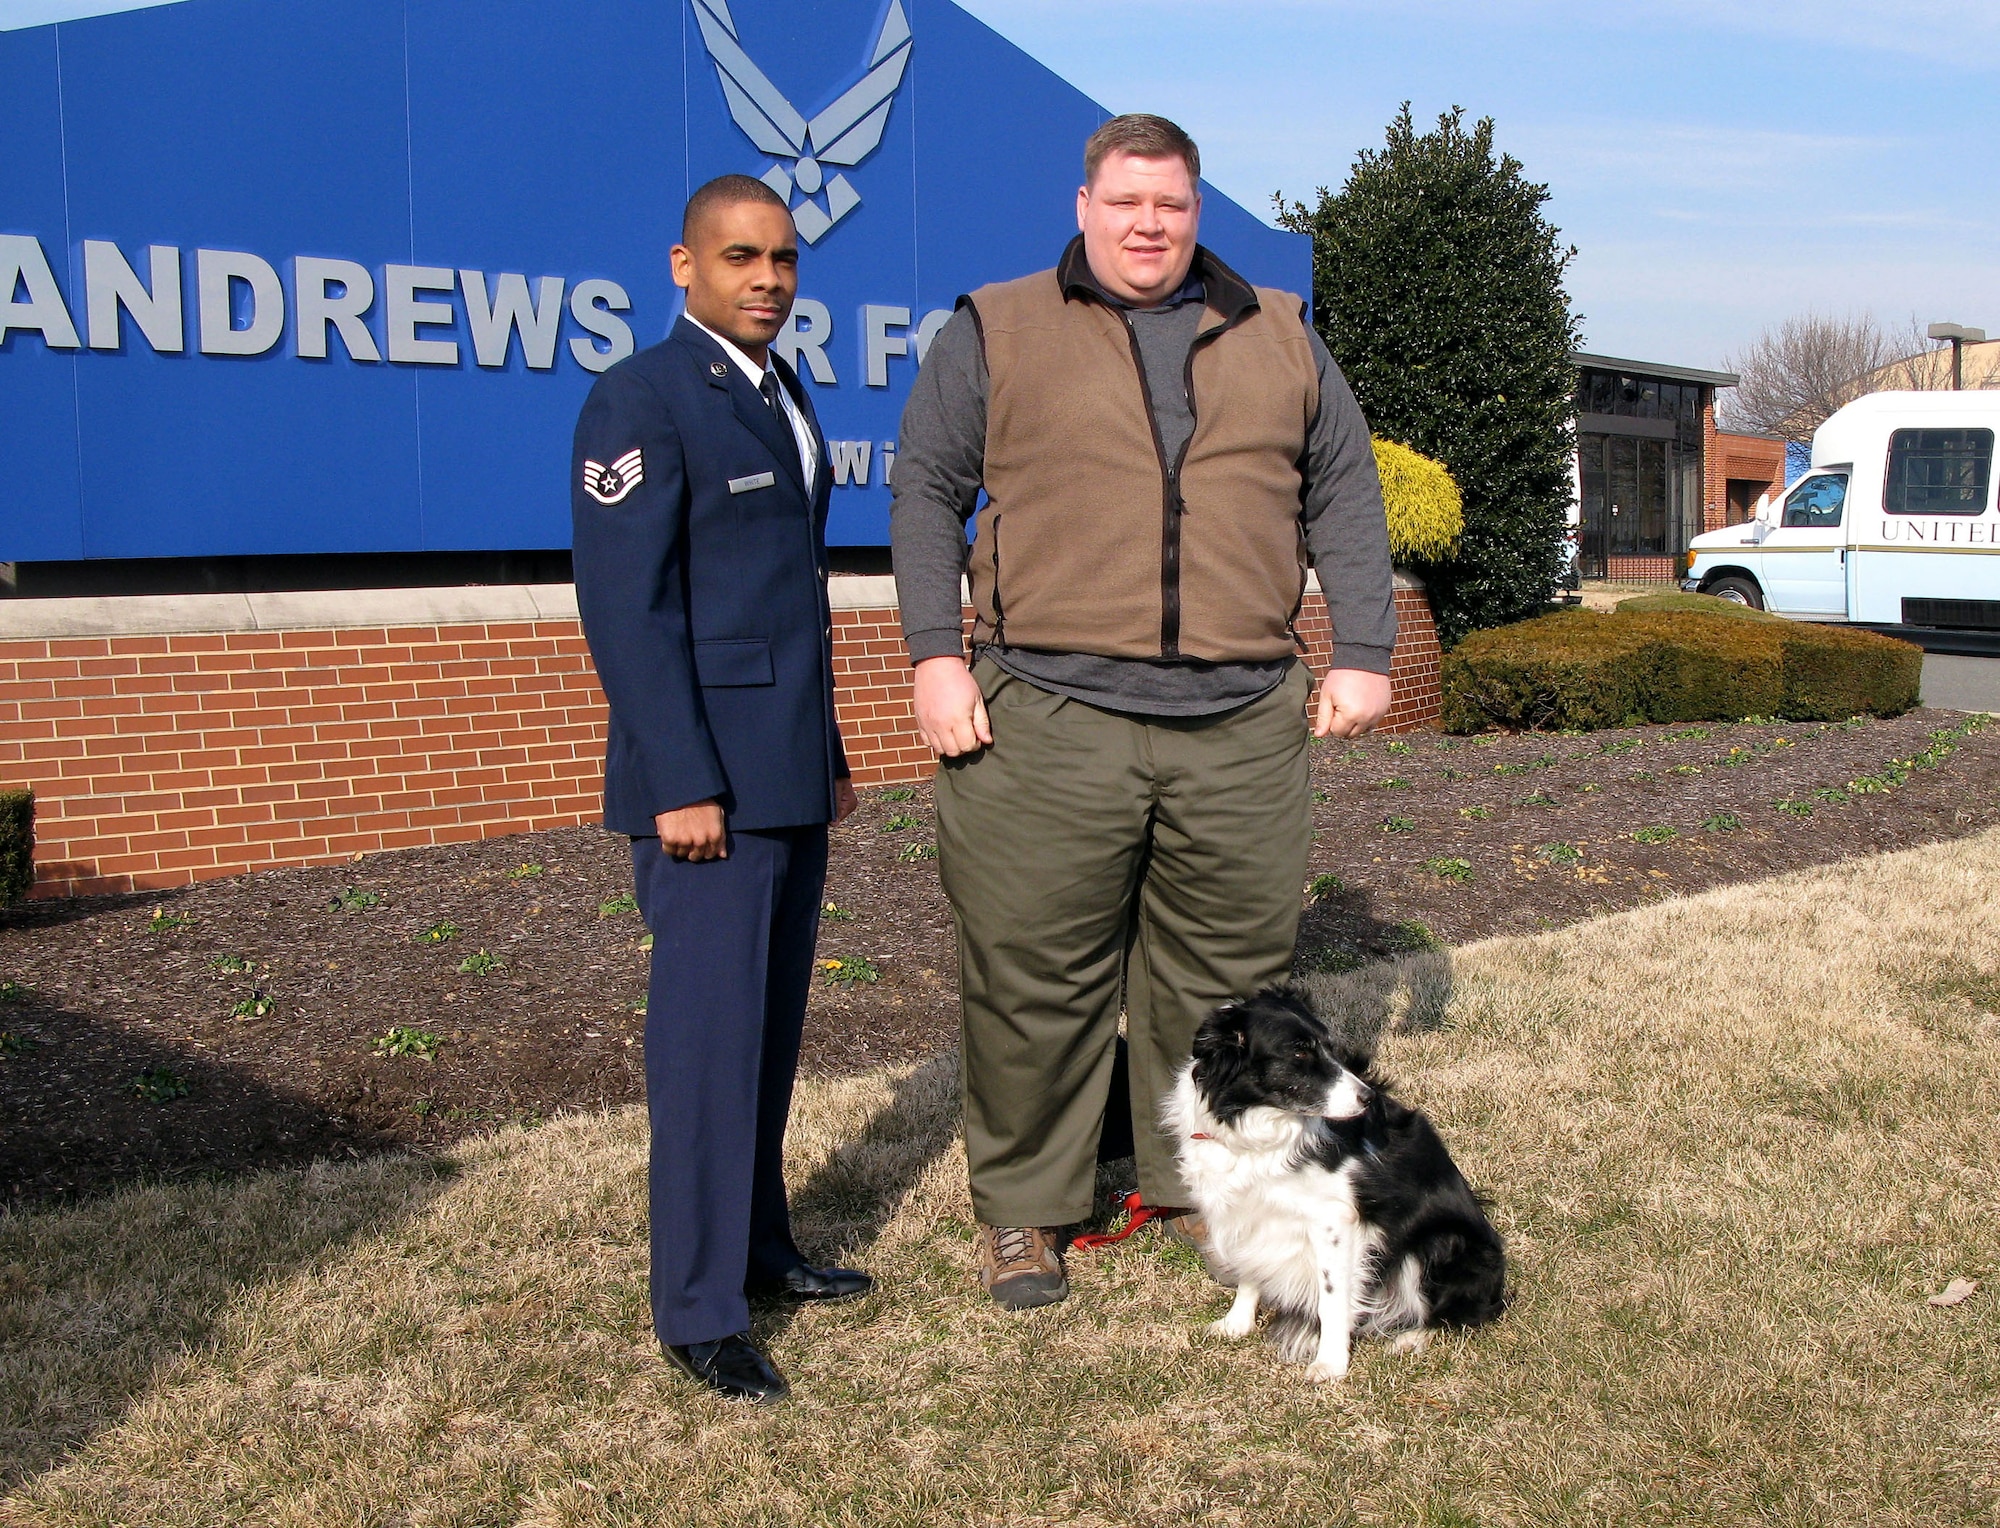 Staff Sgt. Paul White, airfield operations supervisor at Andrews Air Force Base, Md., left, and Dan Vredenburgh, a contractor who oversees the base's Bird/Wildlife Aircraft Strike Hazard program, rely on Bree, a two-tone border collie, as one of many tools to discourage birds and wildlife that could interfere with airfield operations. (Department of Defense photo/Donna Miles)